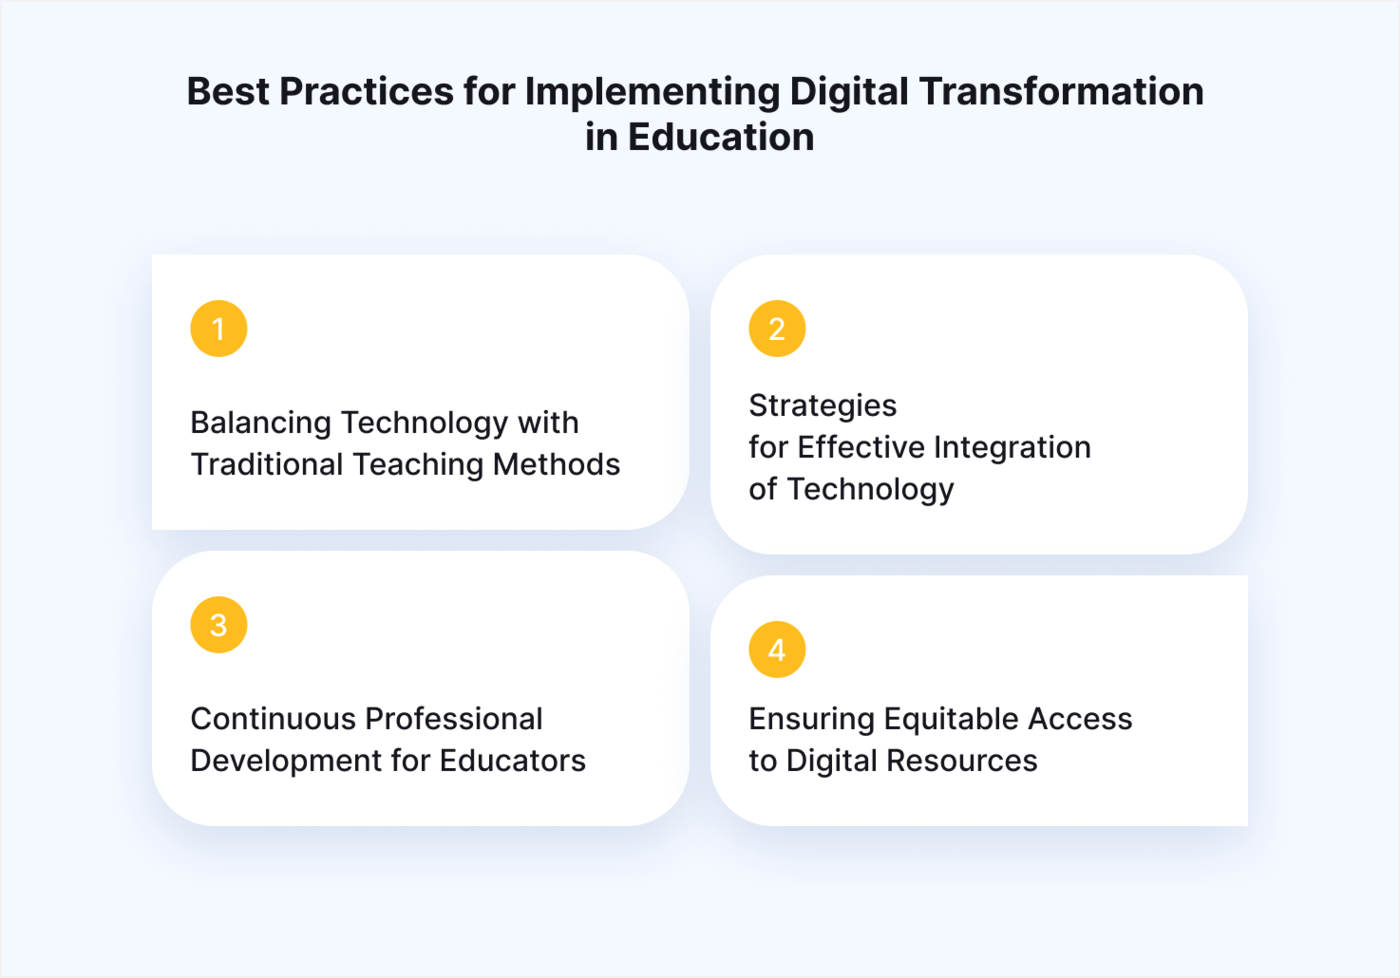 Important best practices of digital transformation in education